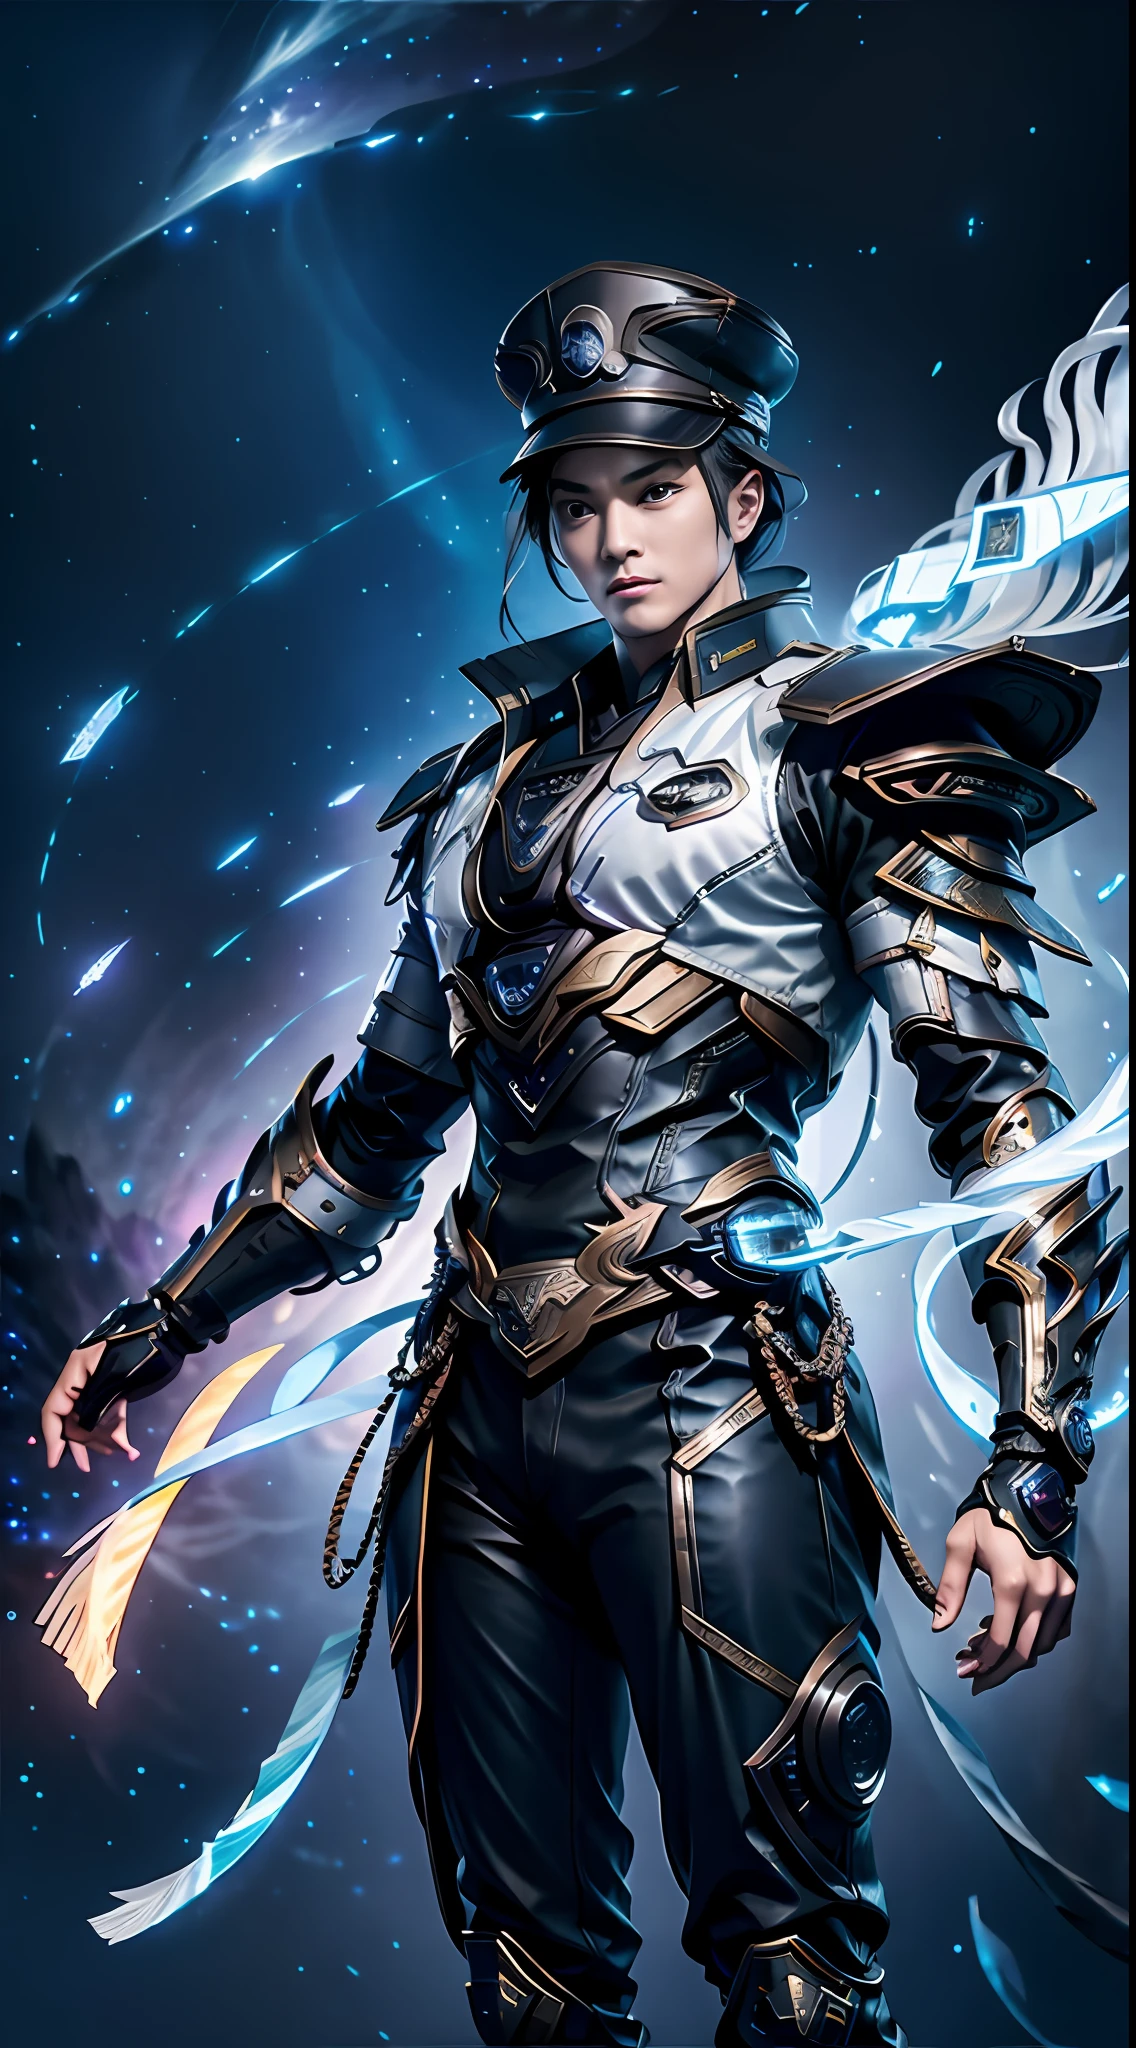 Handsome and intelligent man with short hair（Zhuge Liang's），（Grandma Gray）the hair，Straight posture，Consistent with human anatomy，Feather fan in hand，The starry sky is under control，（（Xiao black purple）（Plain）1：2，mechs)，Chinese military uniform（Starfleet Commander）  military hat，mages，cyber punk style，Futuristic sci-fi style，tmasterpiece，Highest image quality，Real movie shooting，True skin texture，Enrich the picture，Starlight，The Milky Way as a background，Impactful graphics。